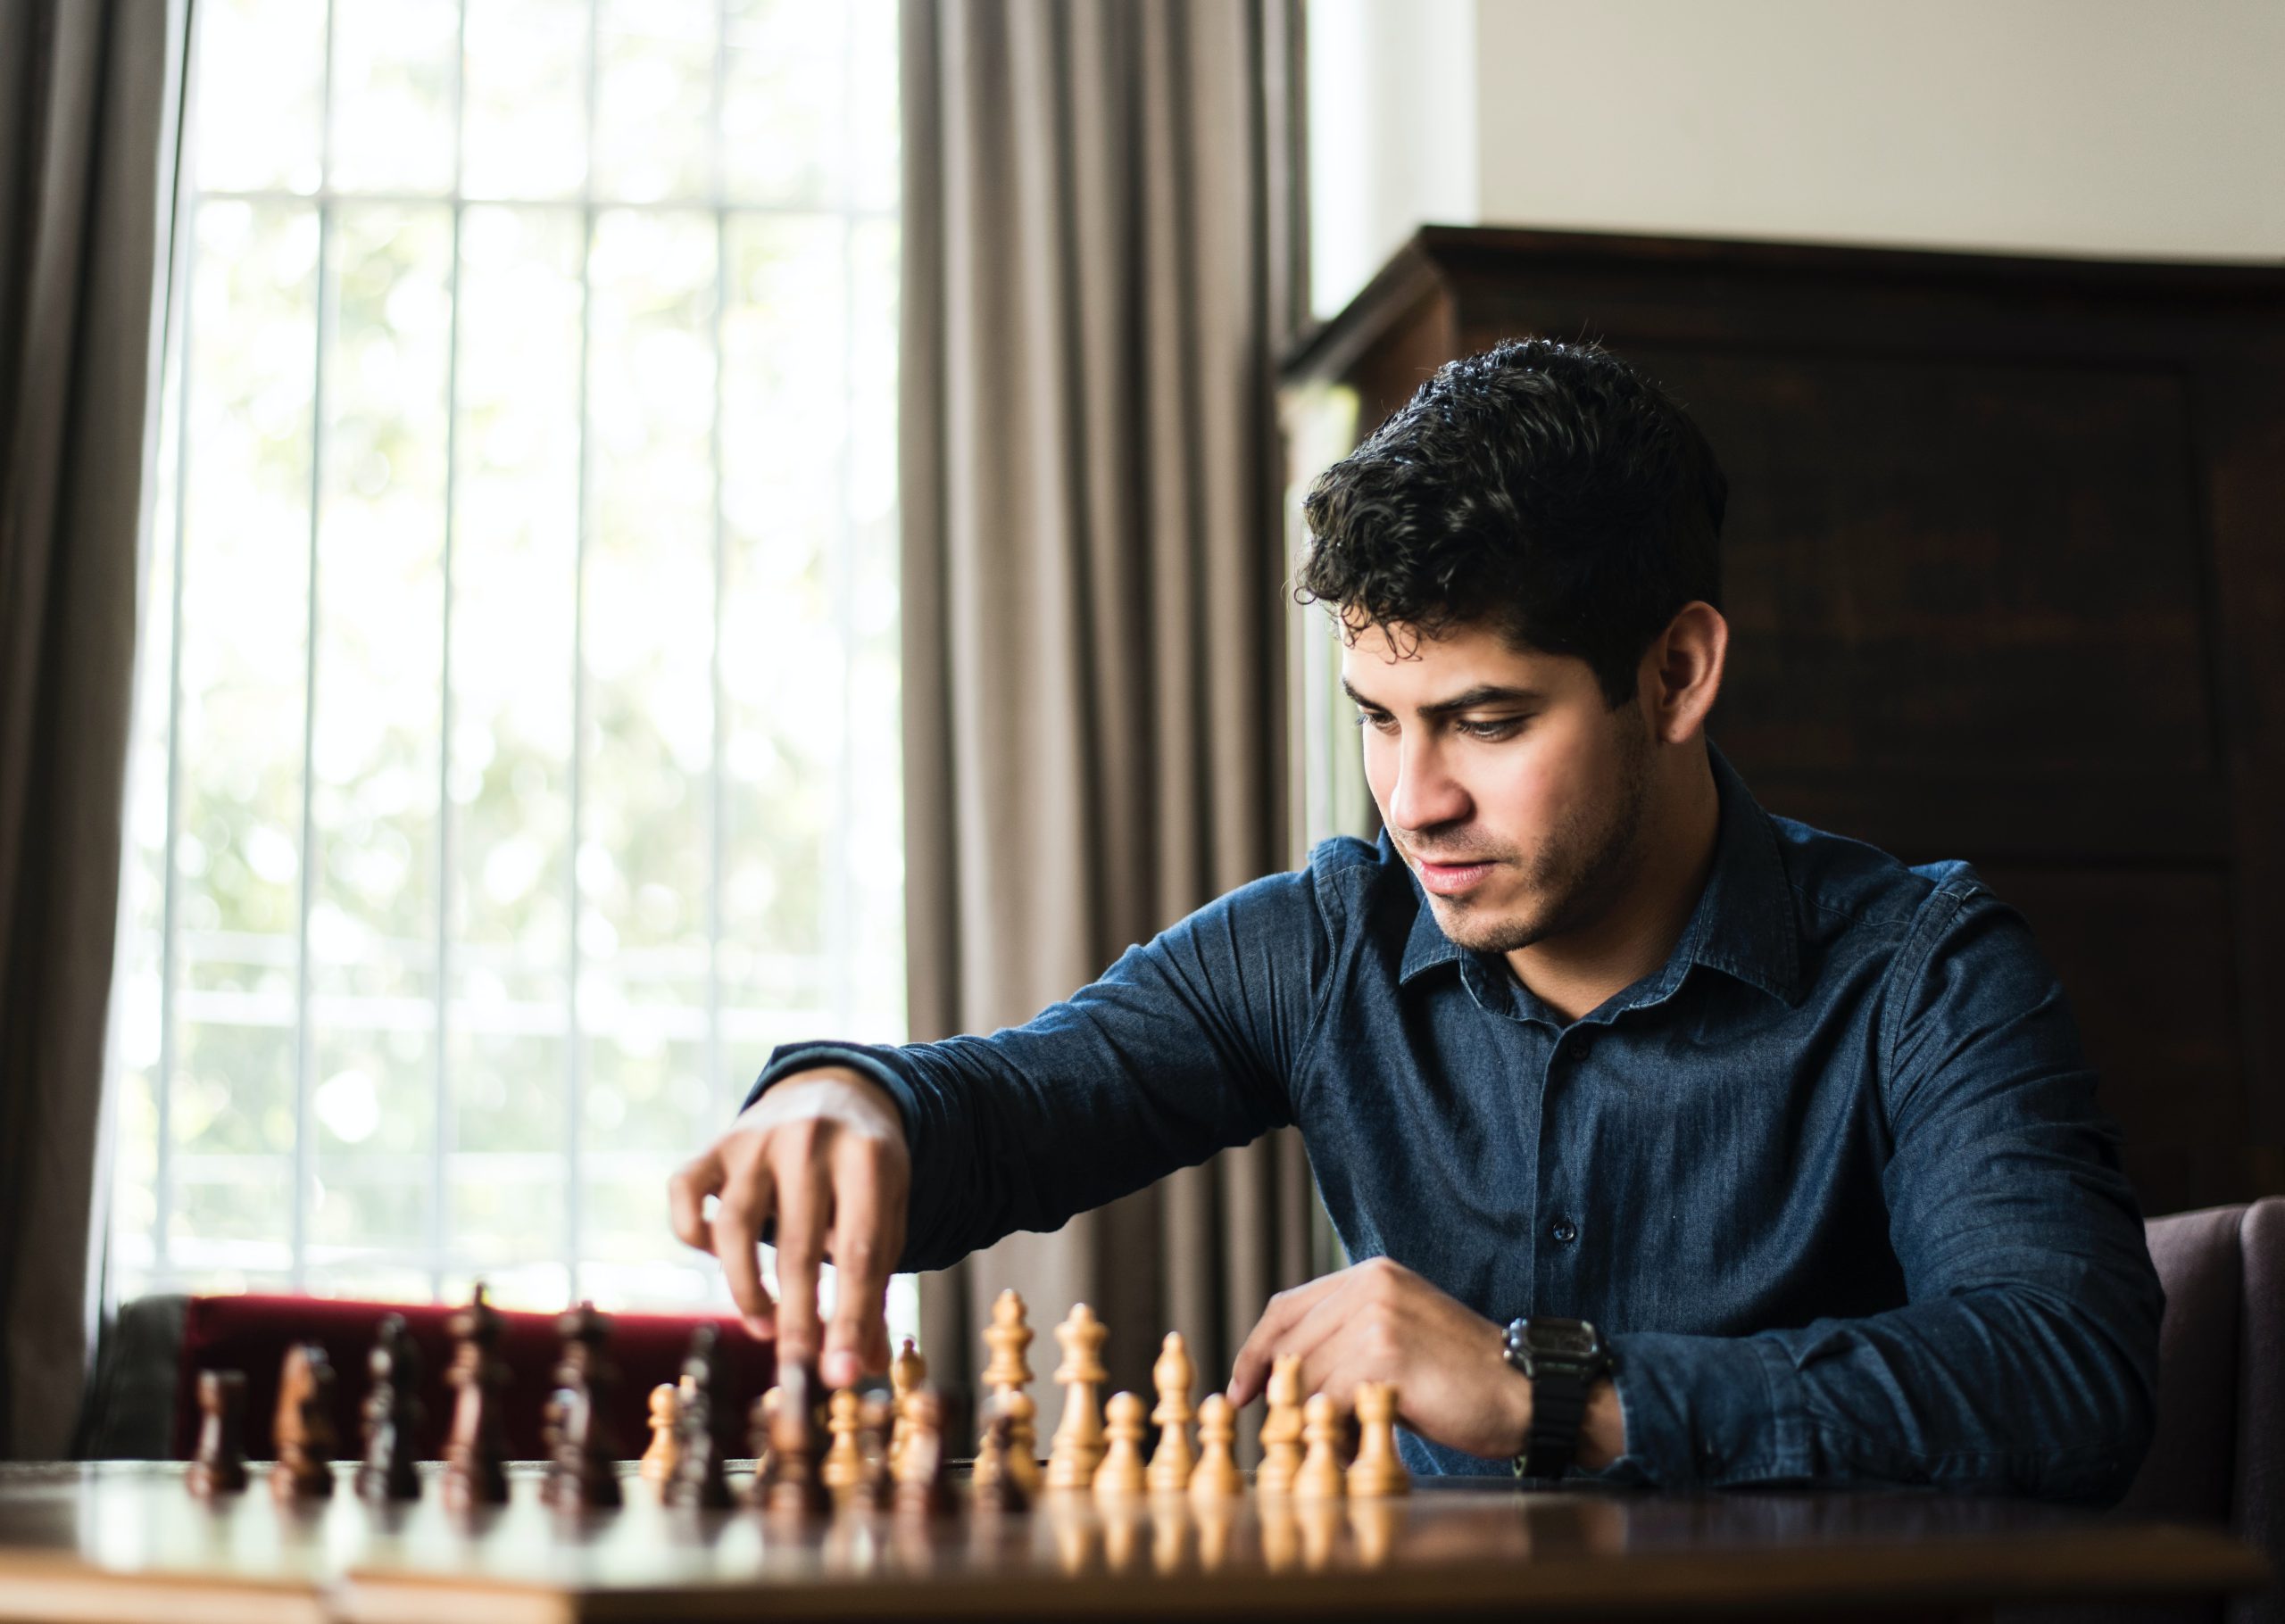 Chess Universe Blog – Tagged quotes on life